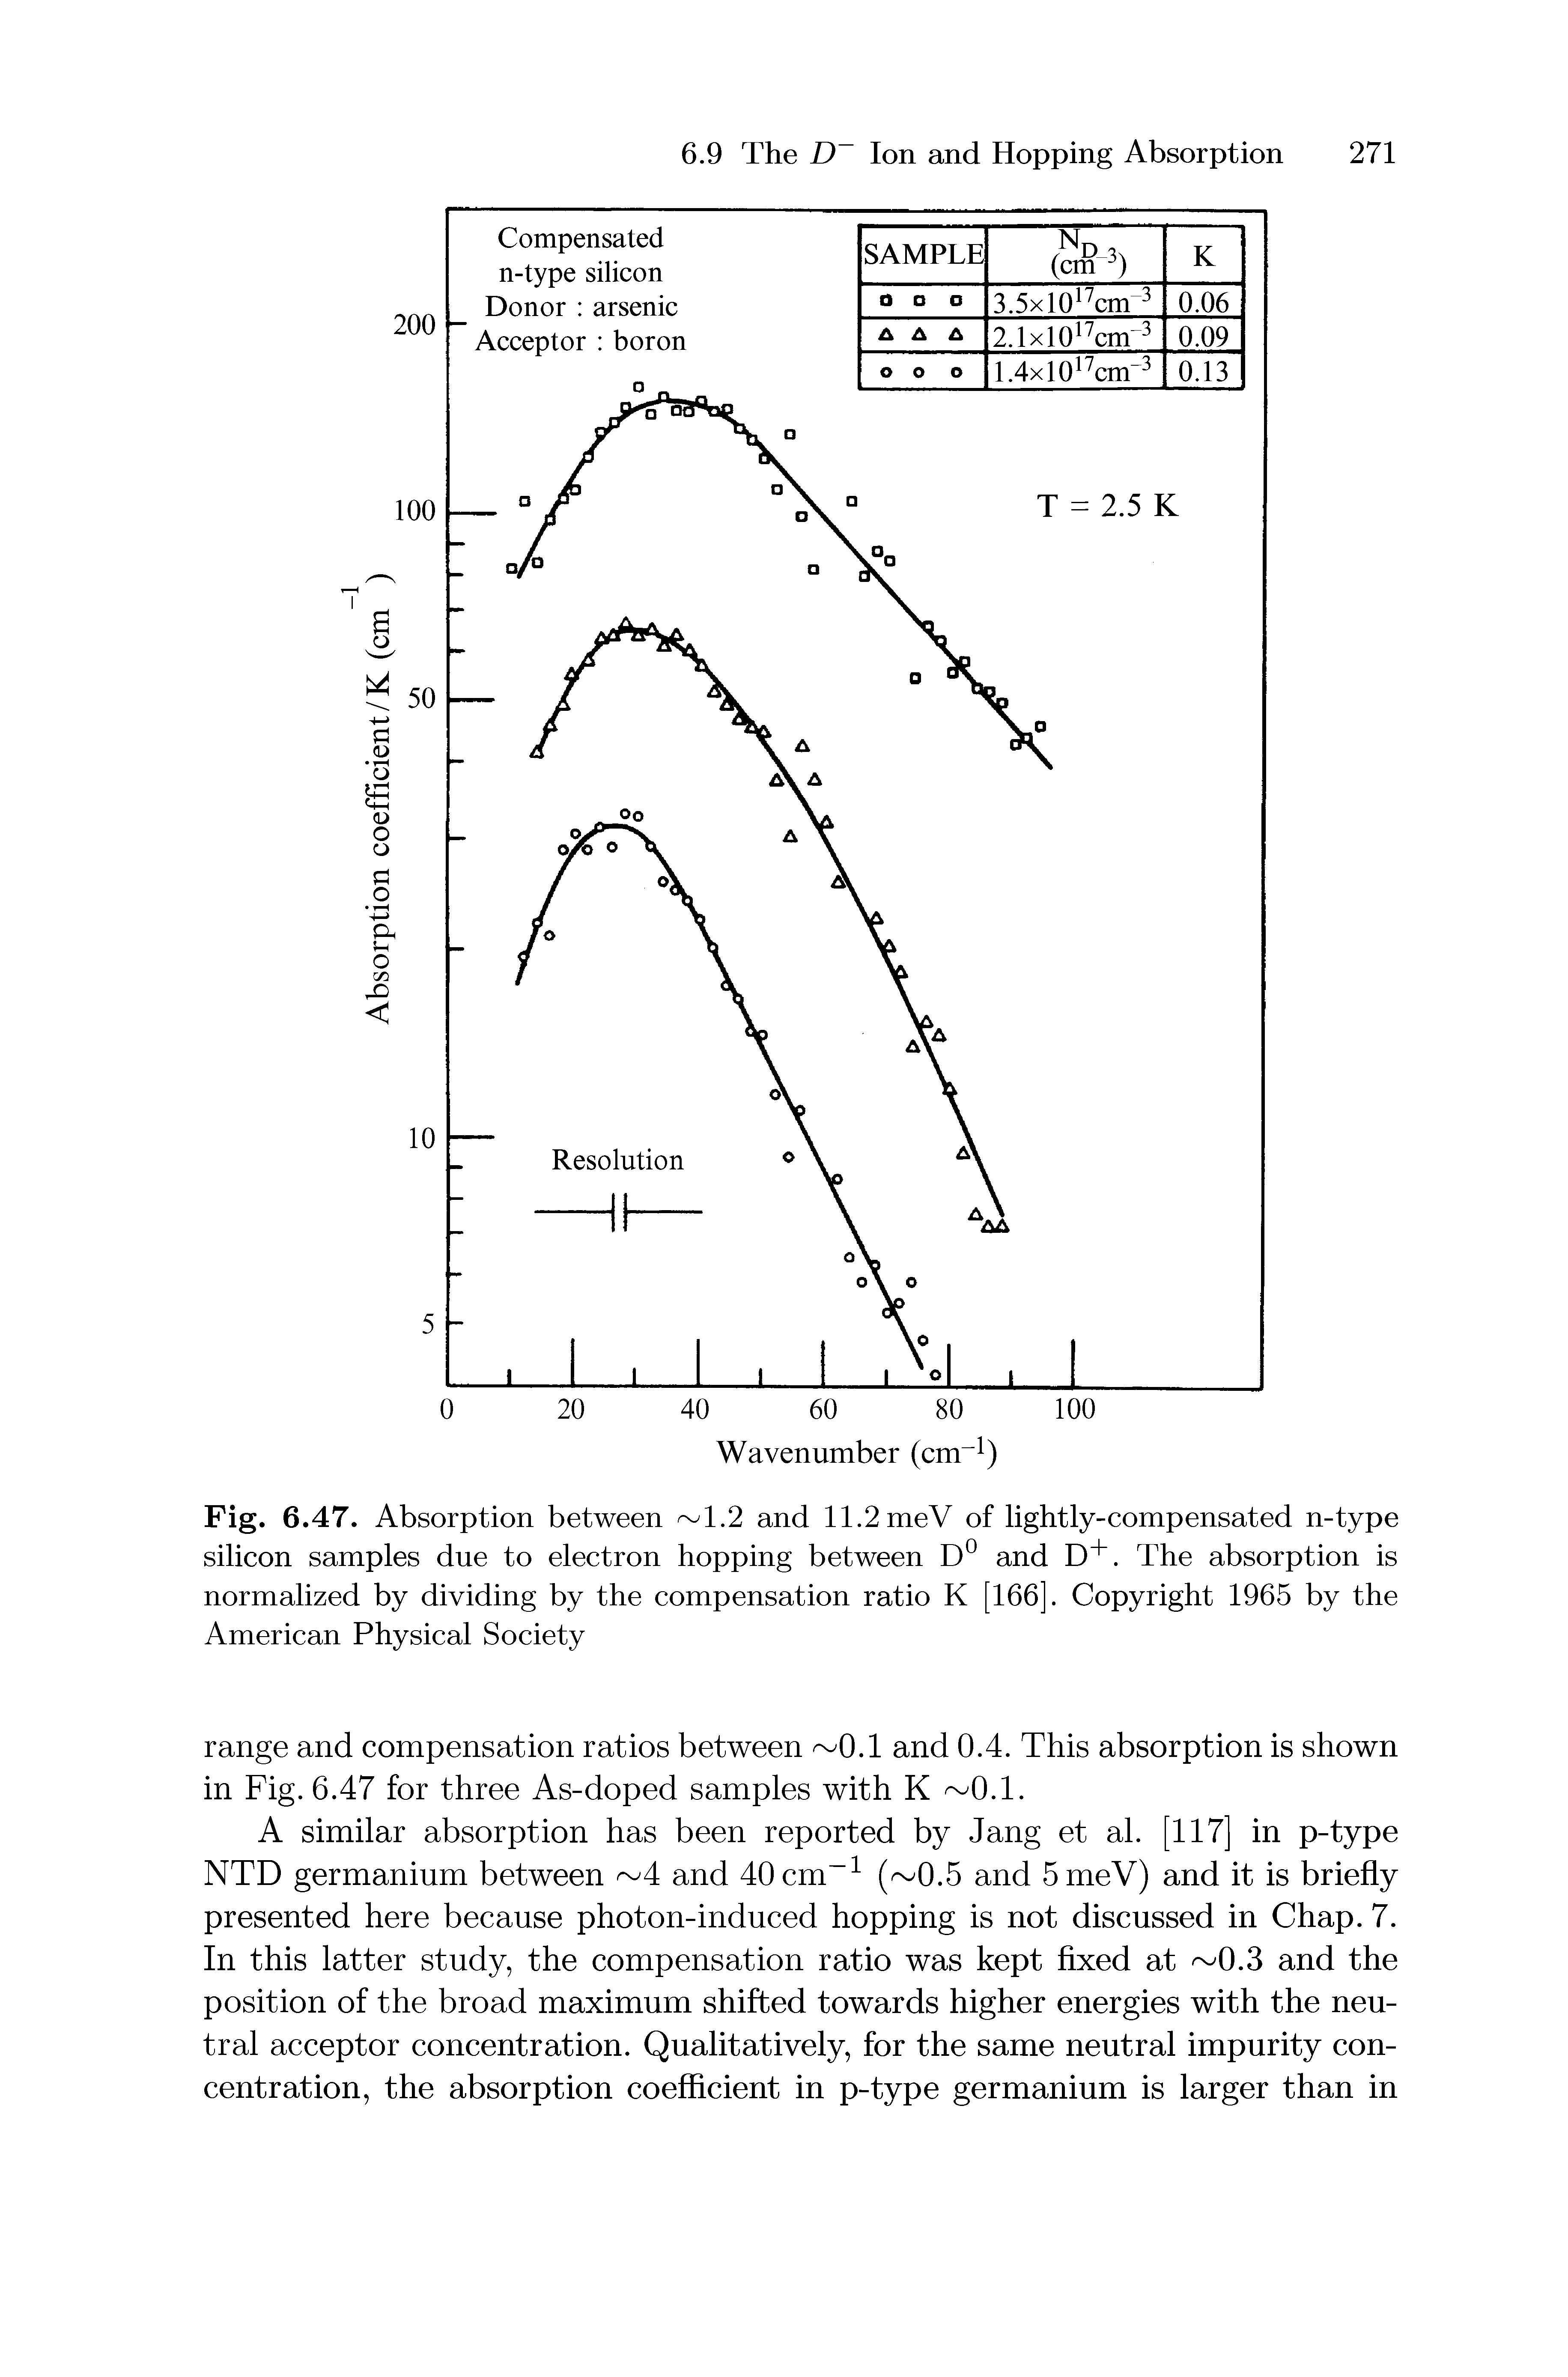 Fig. 6.47. Absorption between 1.2 and 11.2 meV of lightly-compensated n-type silicon samples due to electron hopping between D° and D+. The absorption is normalized by dividing by the compensation ratio K [166]. Copyright 1965 by the American Physical Society...